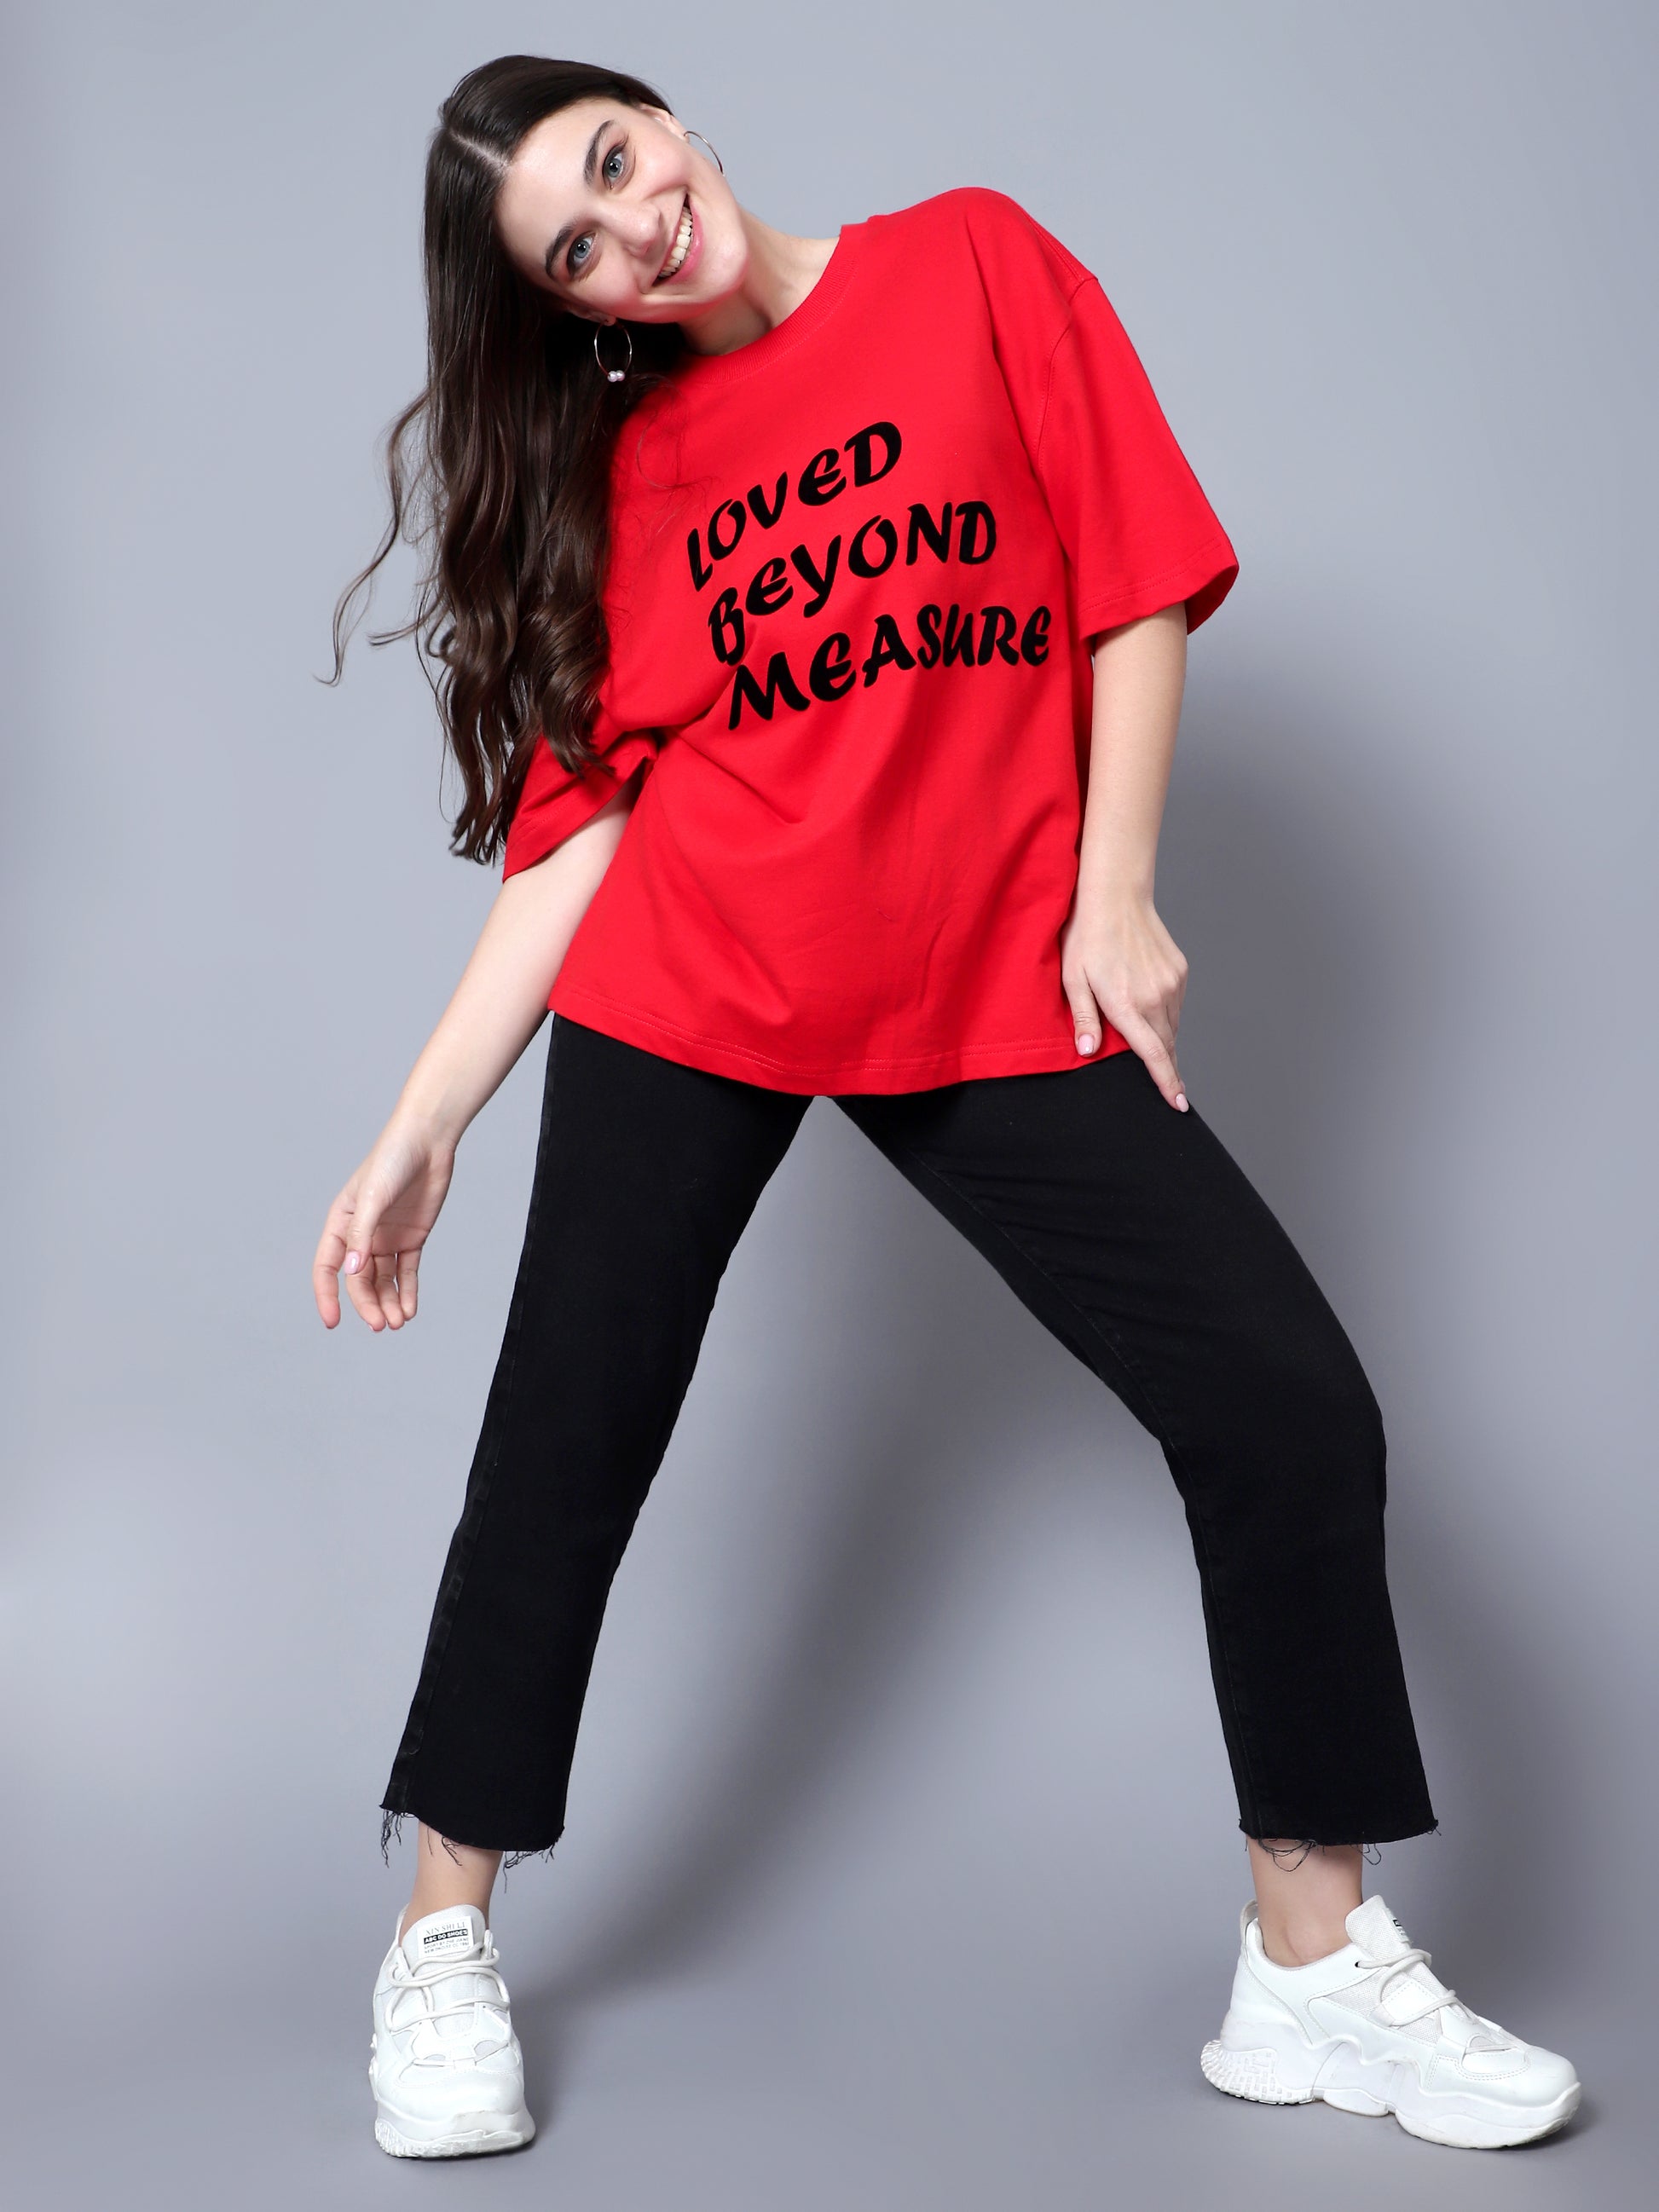 Loved Beyond Measure Over-Sized T-Shirt (Red) - Wearduds